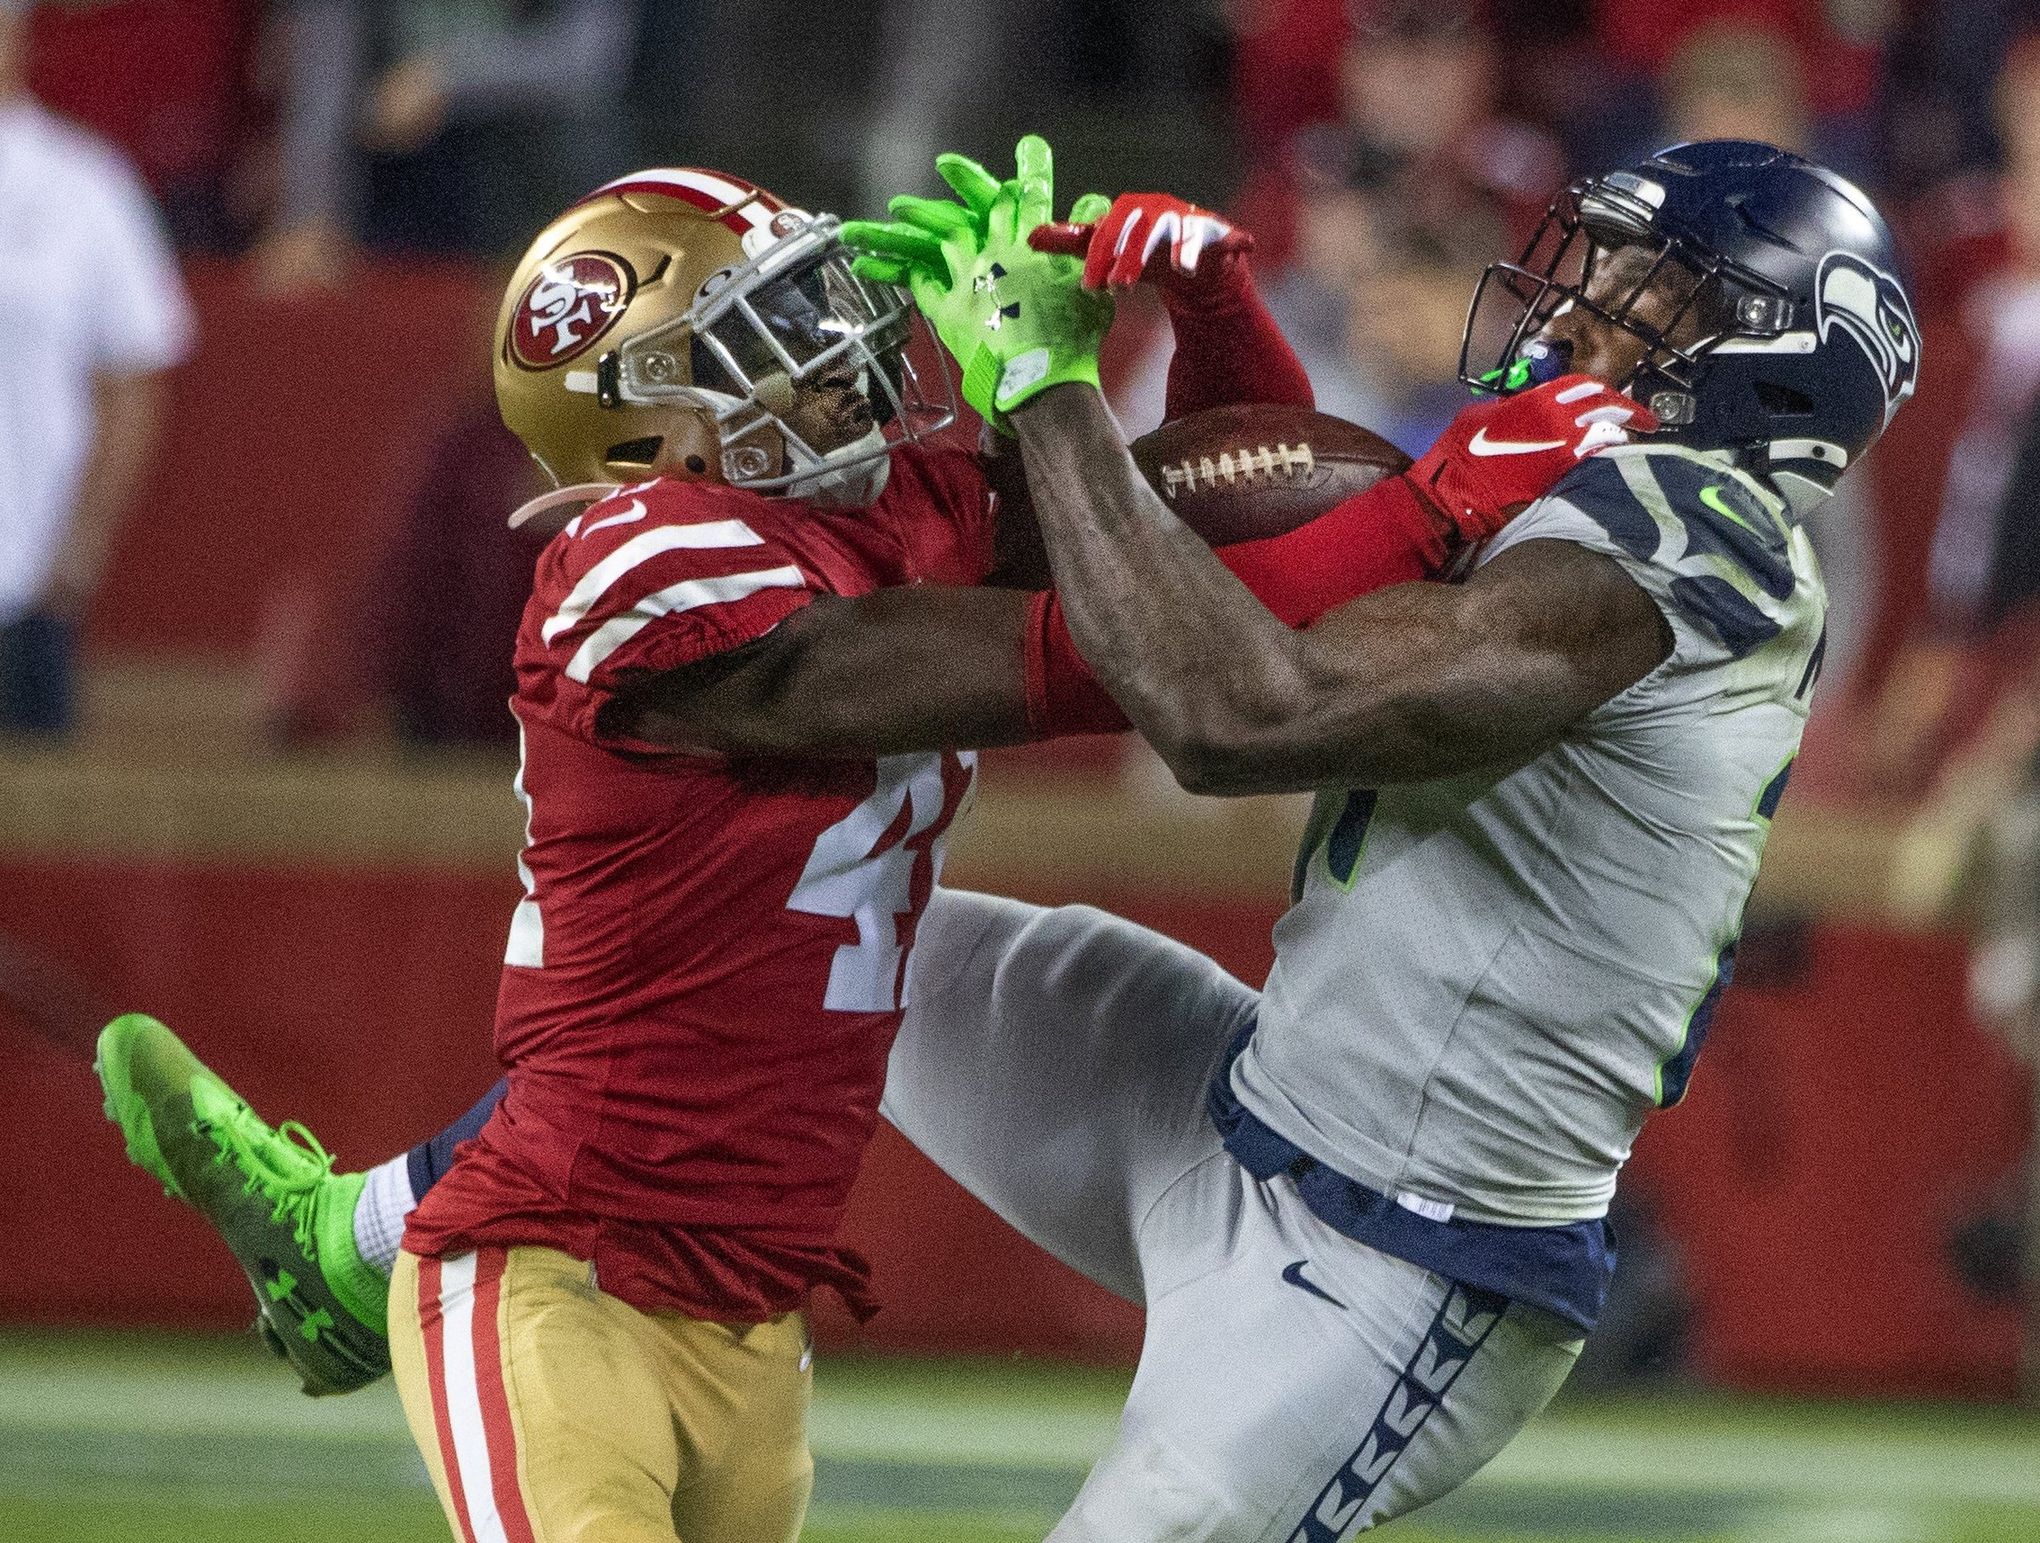 Seahawks-49ers game to decide NFC West title moved to prime time